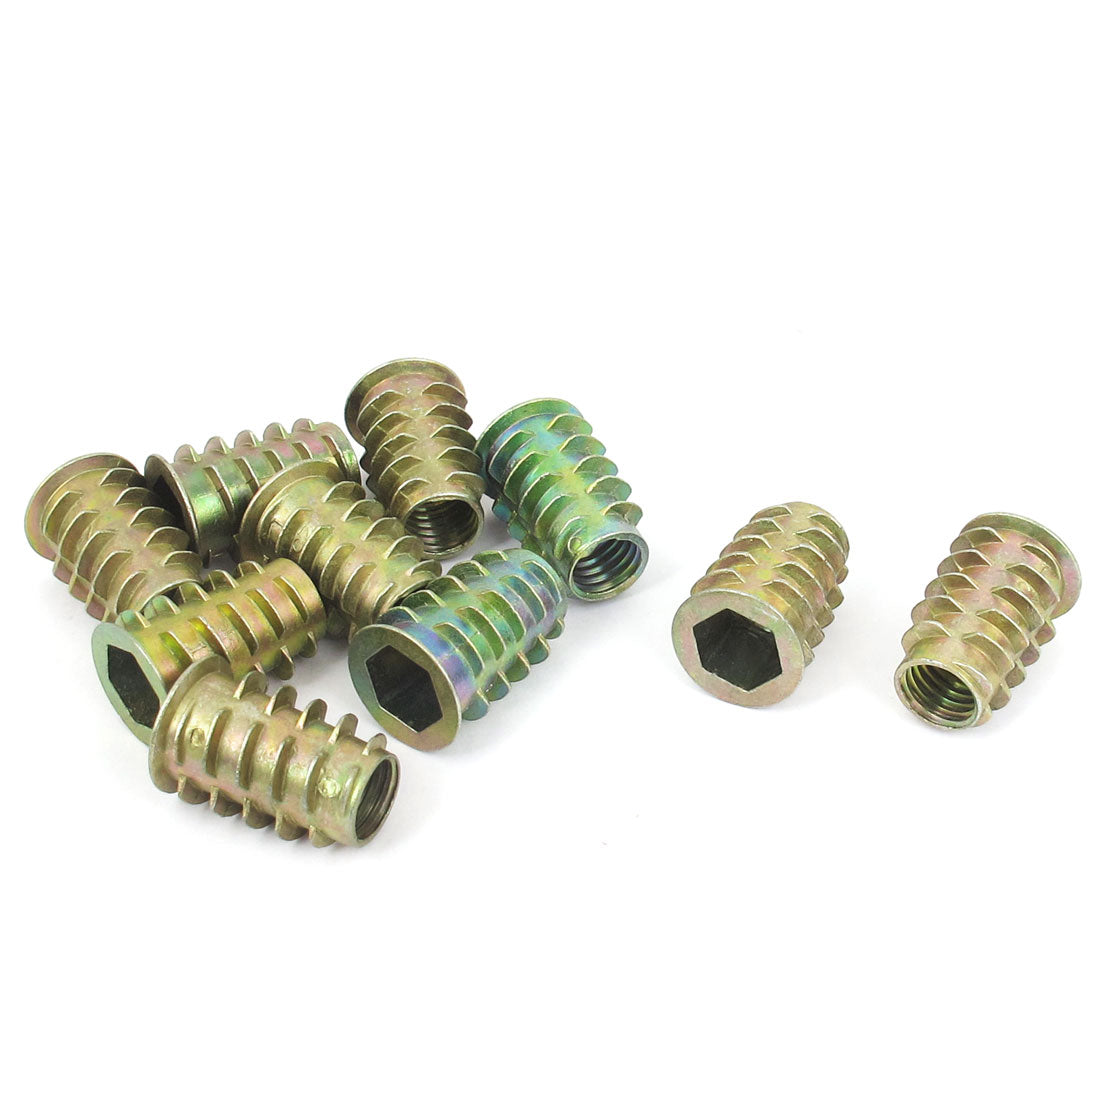 uxcell Uxcell 10 Pcs M10x25mm Zinc Plated Hex Socket Screw in Thread Insert Nut for Wood